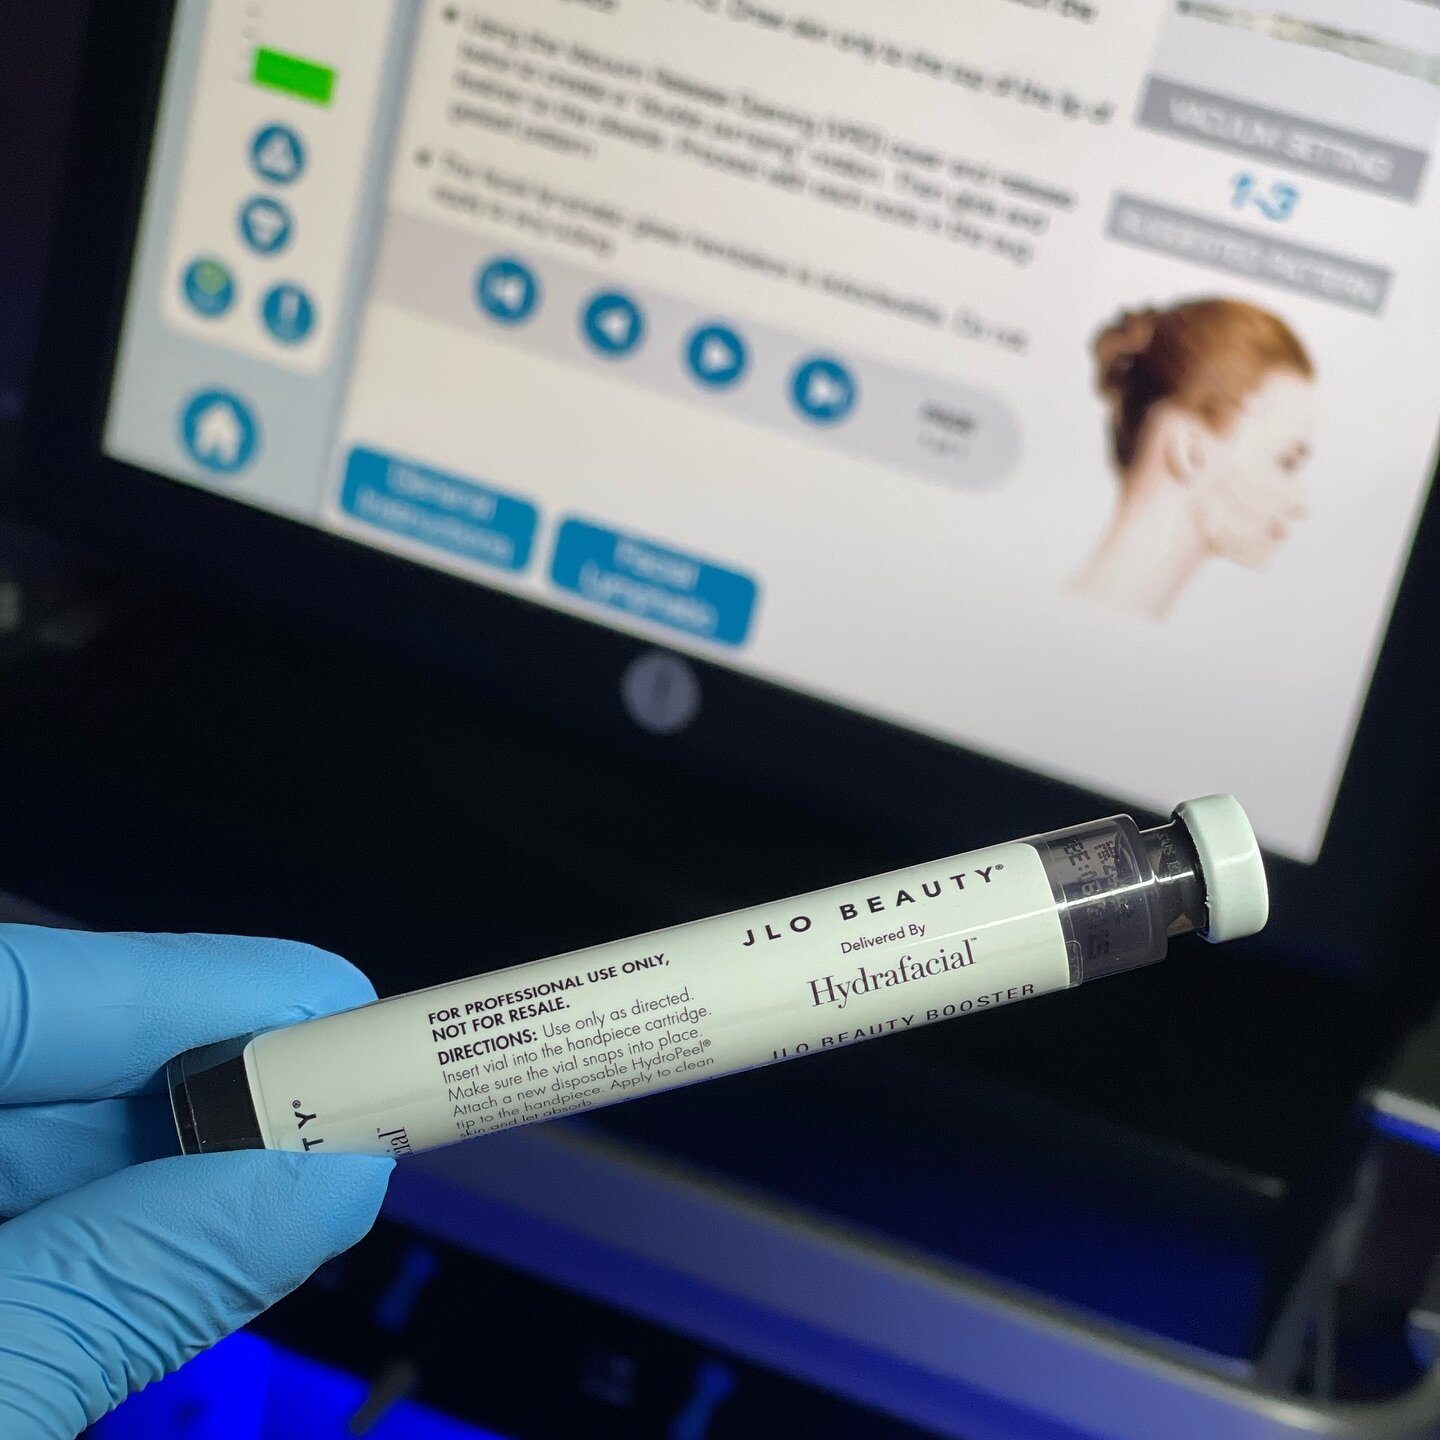 Starting the New Year with a JLo booster, because why not glow up from the get-go? ✨💫 

The HydraFacial with the JLo booster offers a radiant and refreshed skin appearance. It helps to brighten, hydrate, and rejuvenate the skin, giving it a youthful